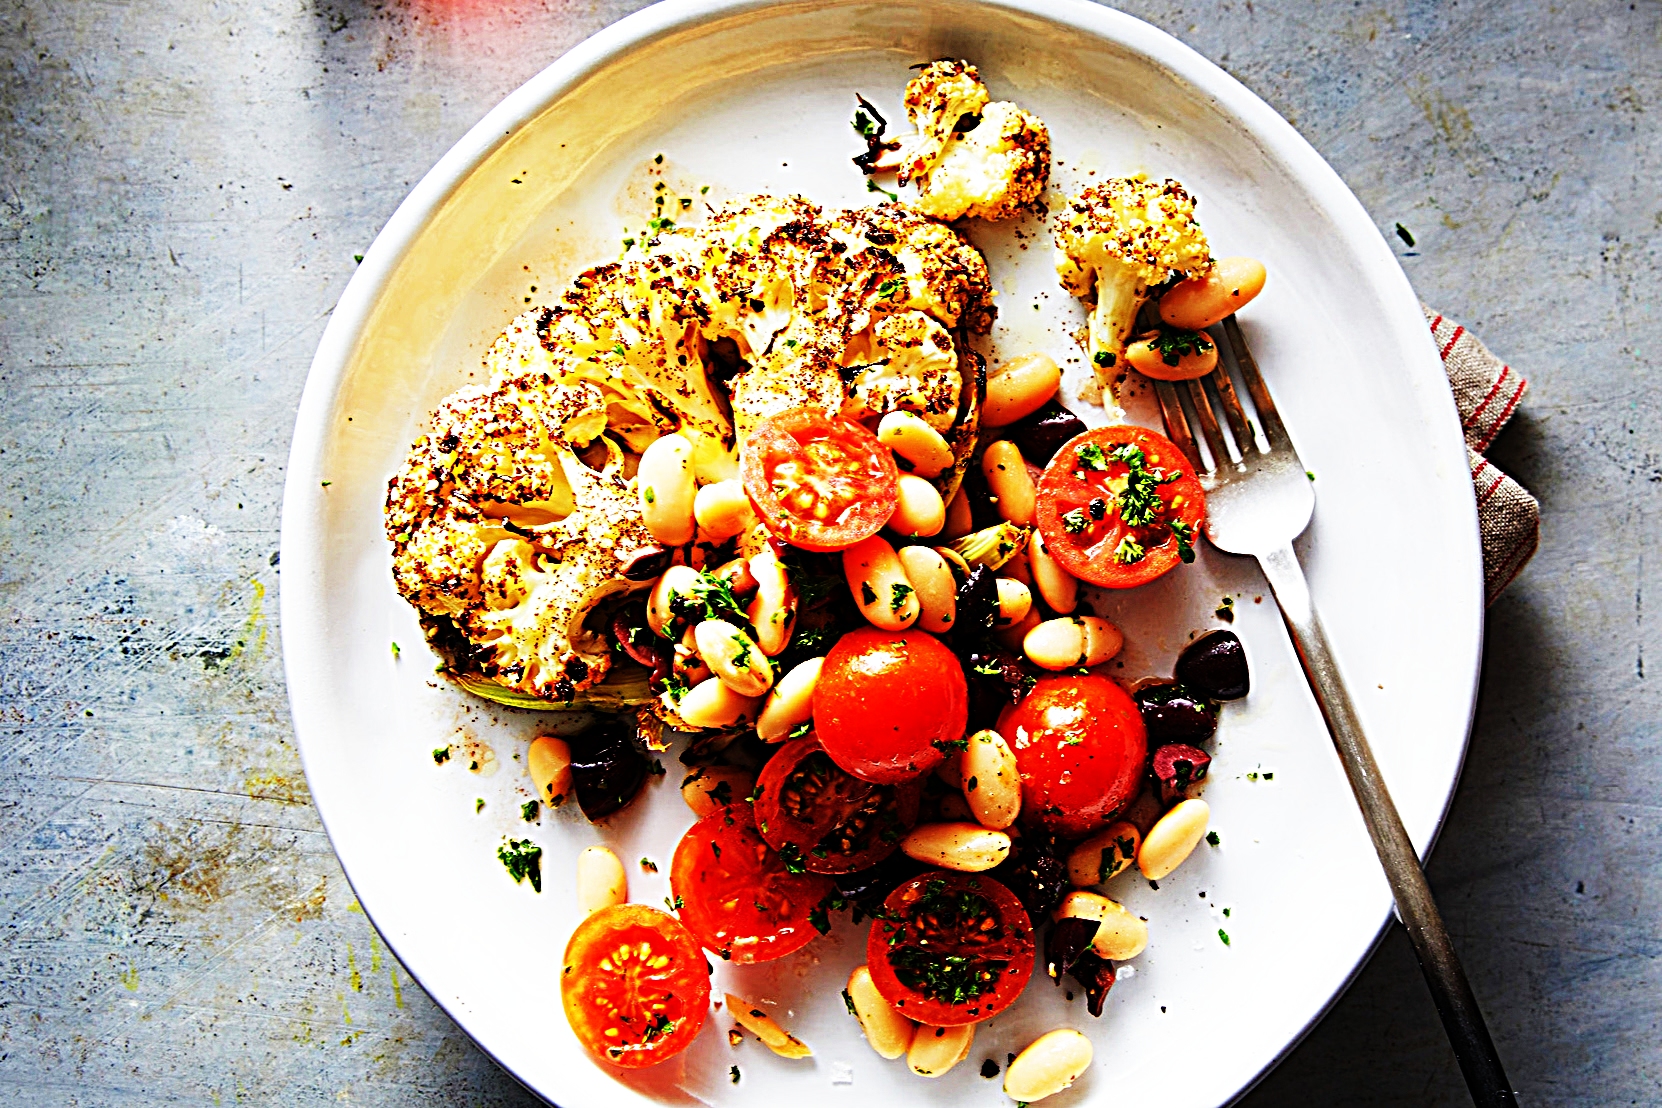 Stupid-Easy Recipe for Za’atar-Roasted Cauliflower Steaks with Bean Salad (#1 Top-Rated)